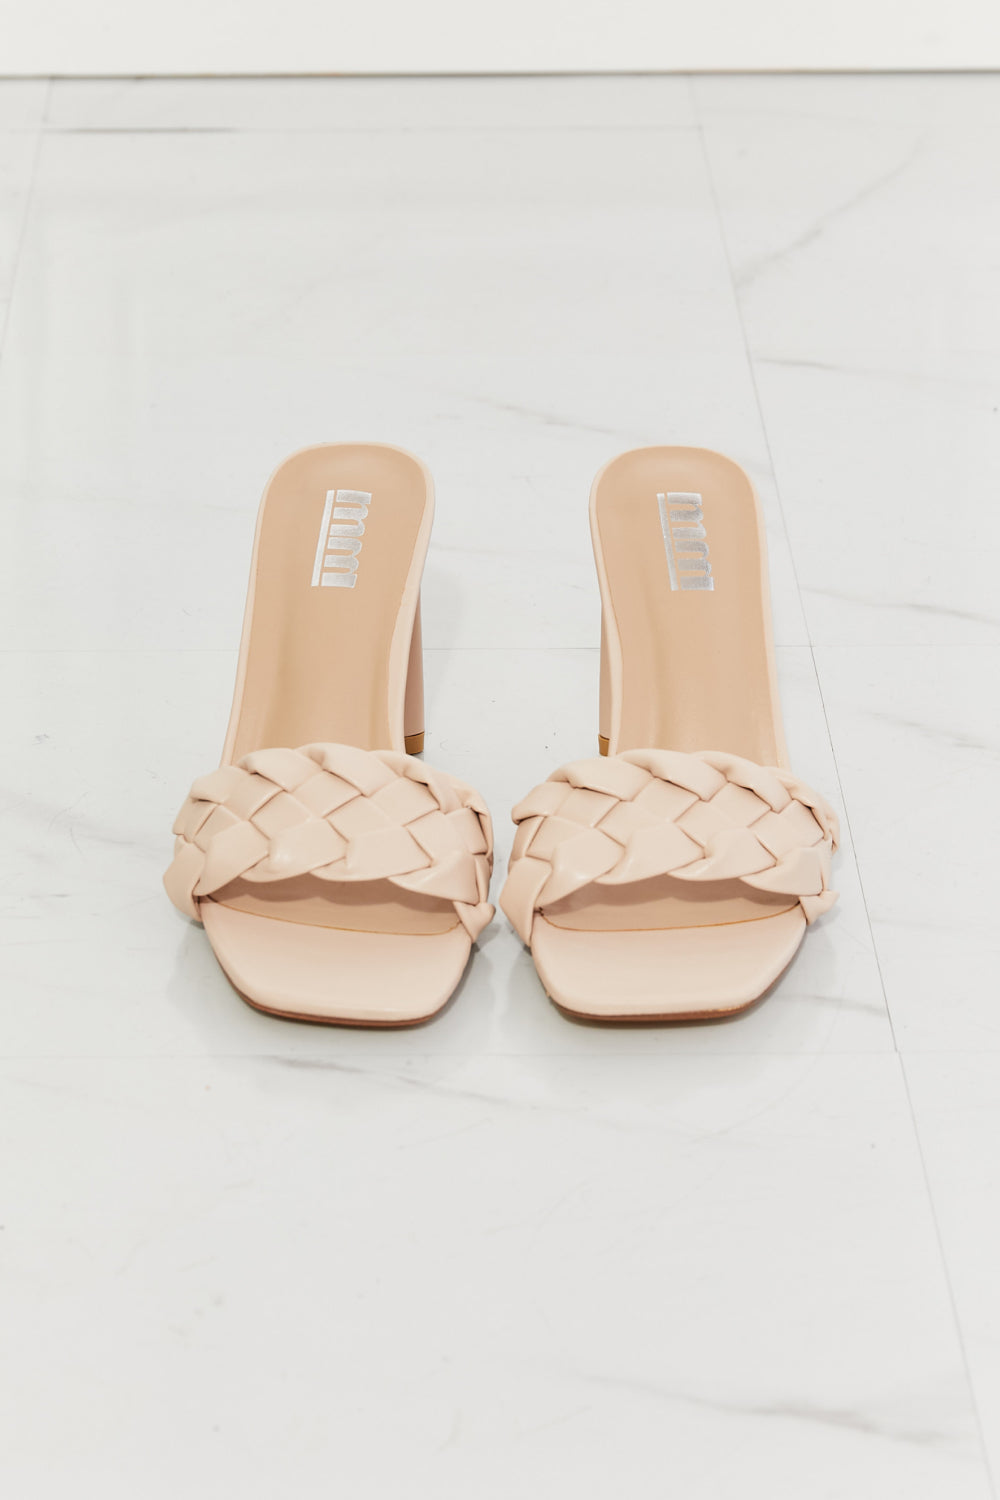 MMShoes Top of the World Braided Block Heel Sandals in Beige - FunkyPeacockStore (Store description)